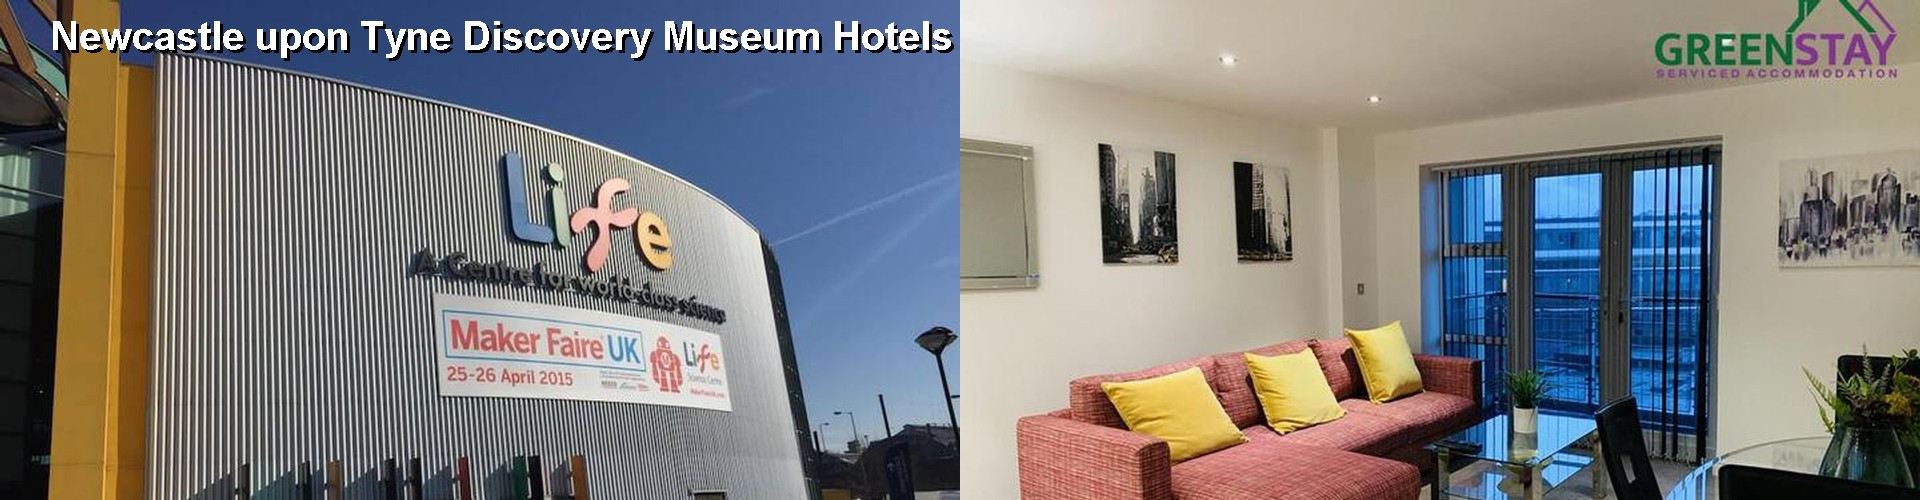 5 Best Hotels near Newcastle upon Tyne Discovery Museum